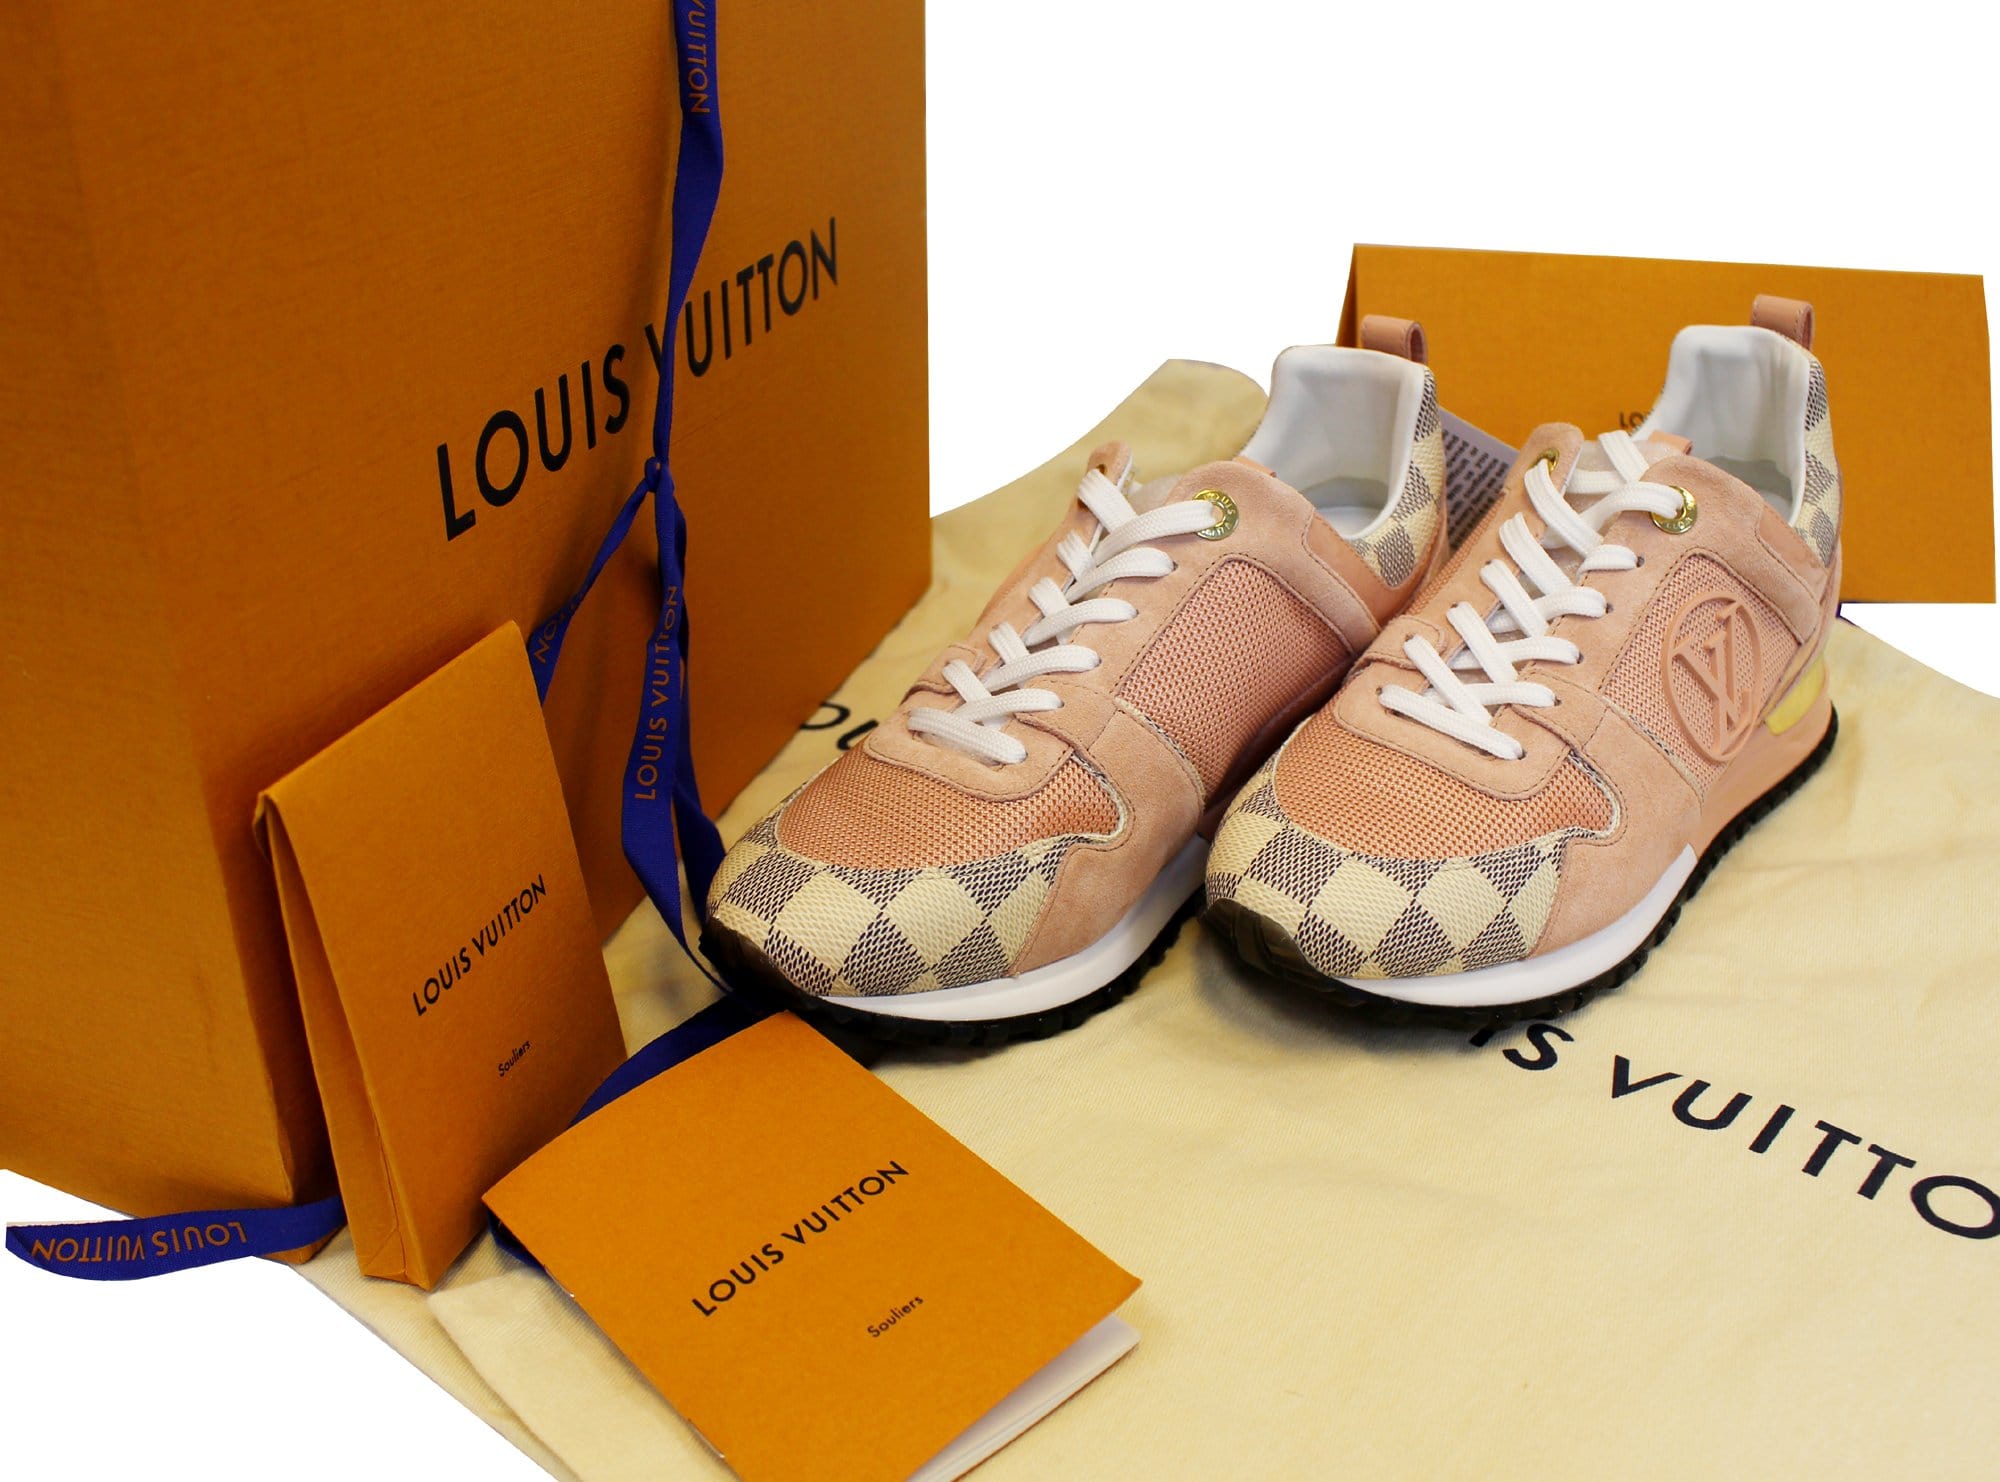 LOUIS VUITTON/YEEZEY COLAB. $225 (TAKING DEPOSITS OF $50 ABOUT TO ORDER A  CASE DM …